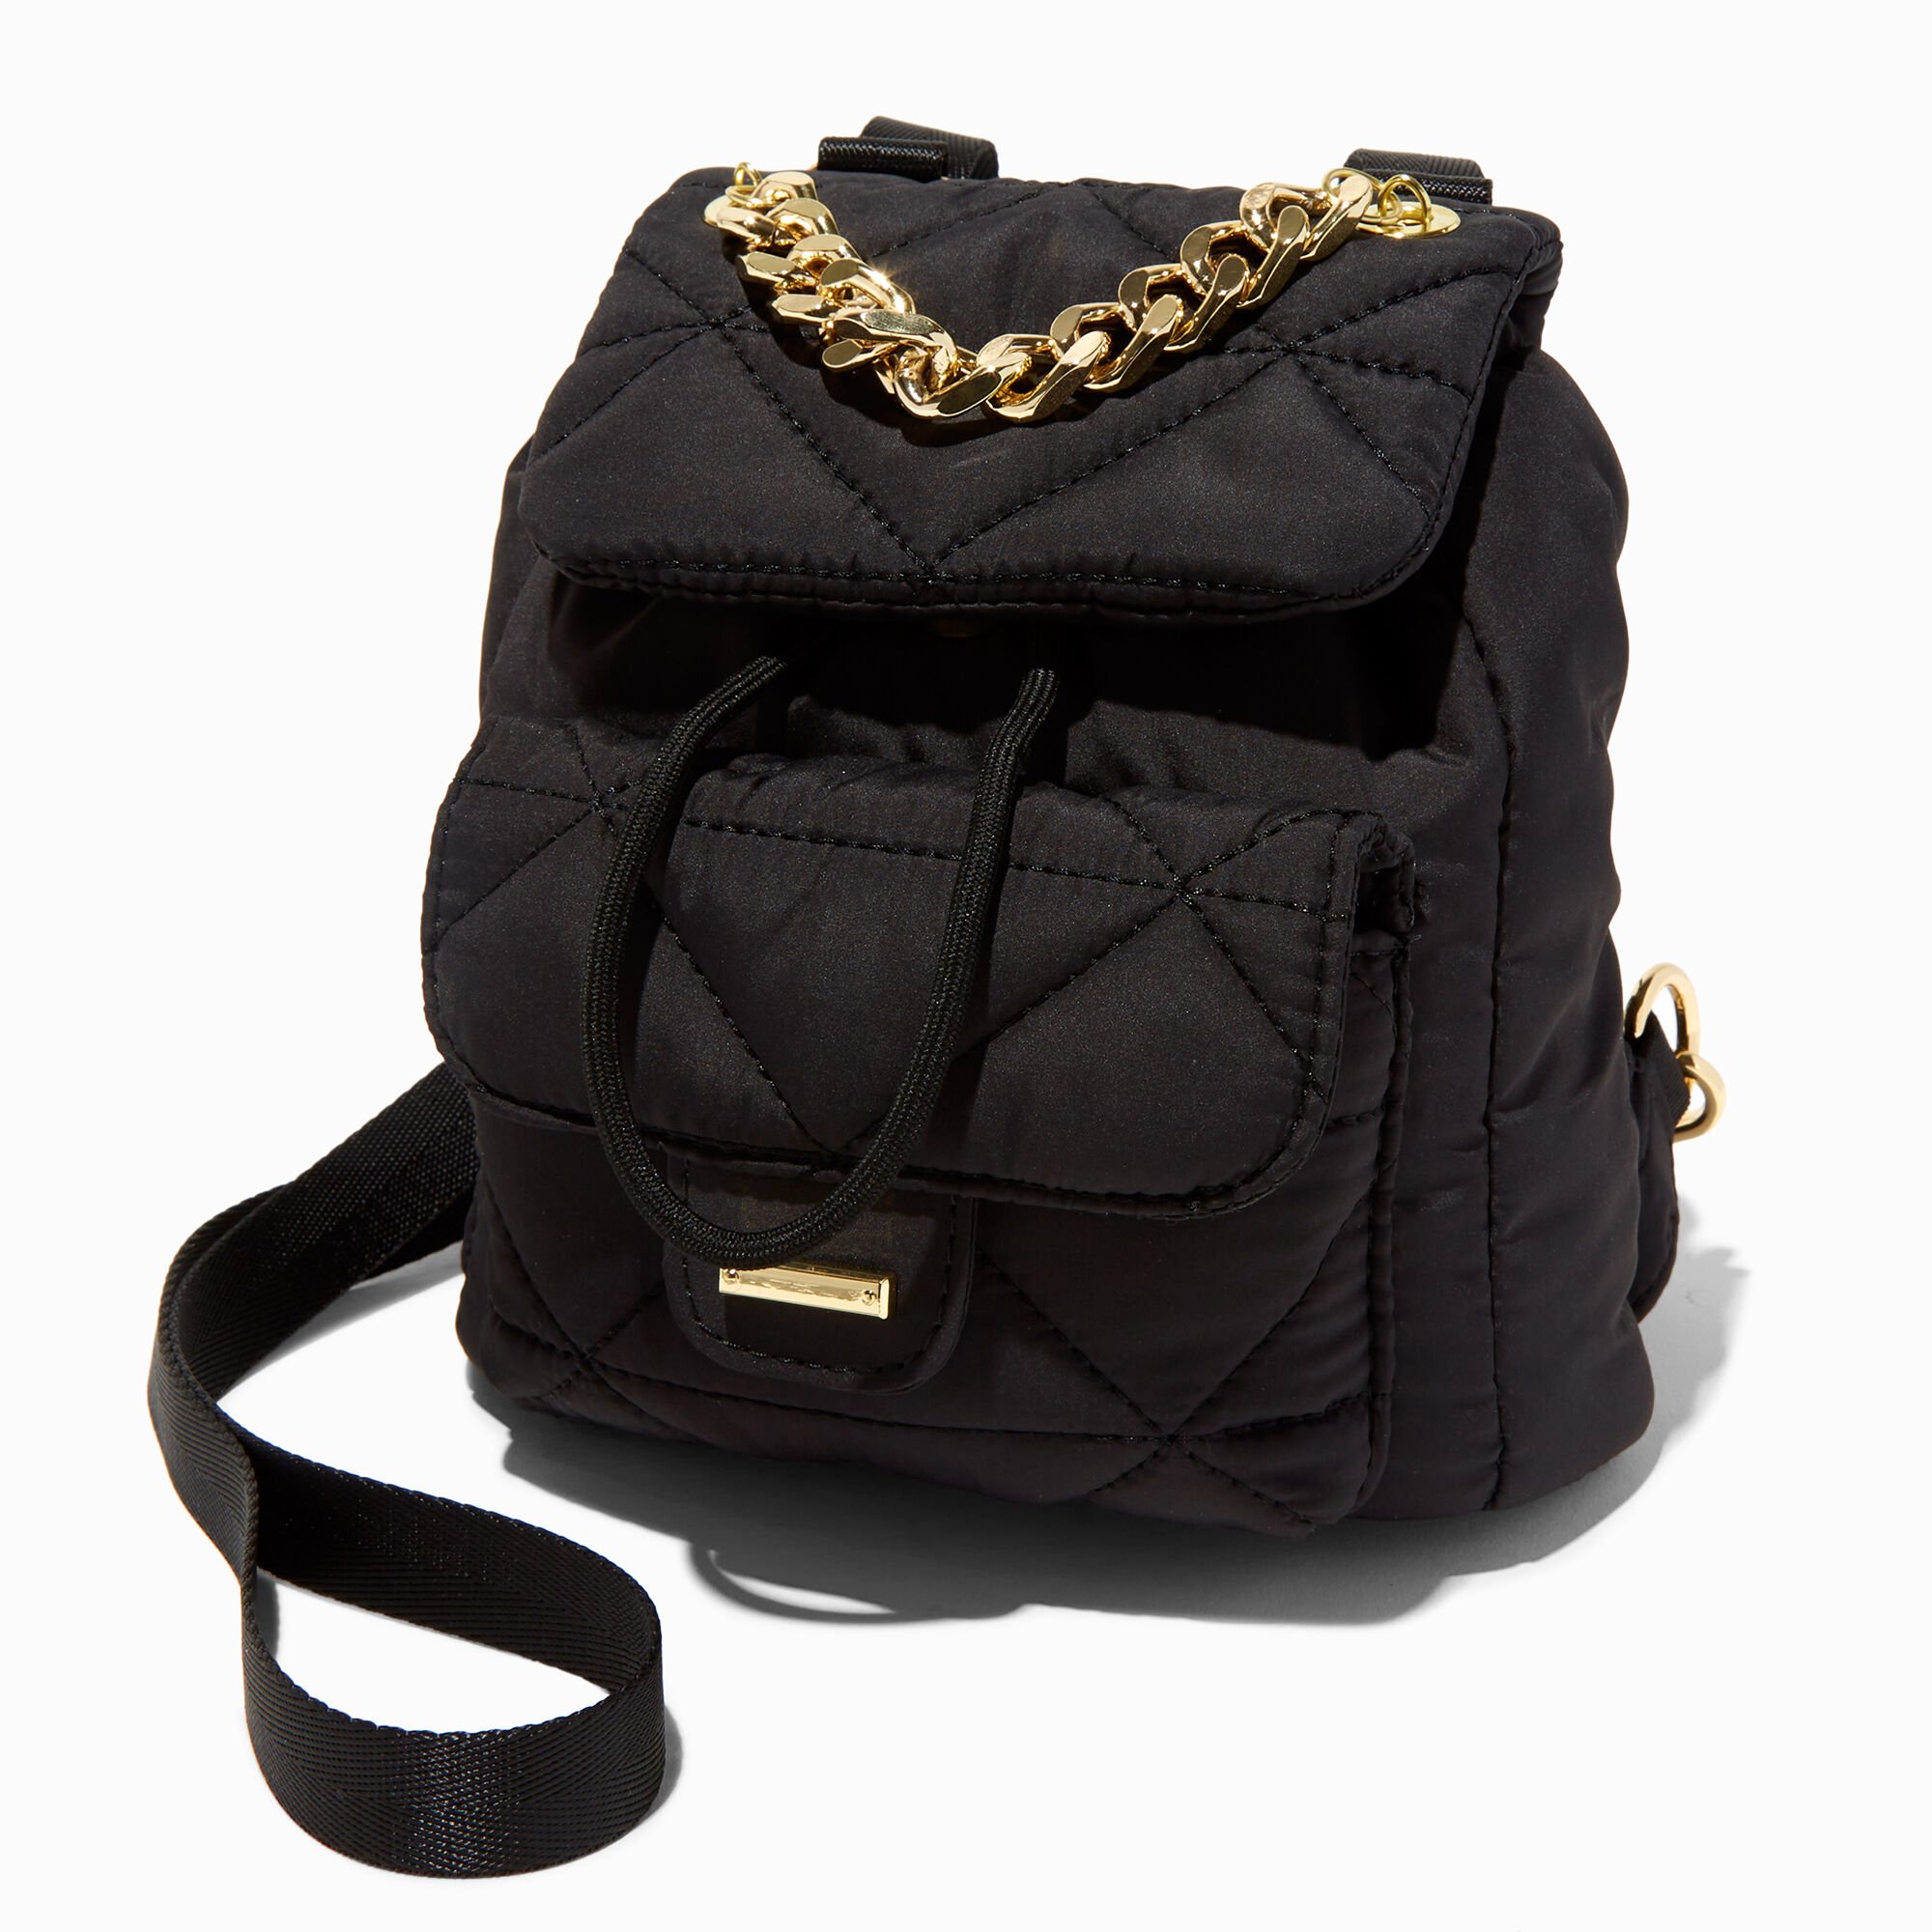 View Claires Quilted Chain Handle Backpack Black information